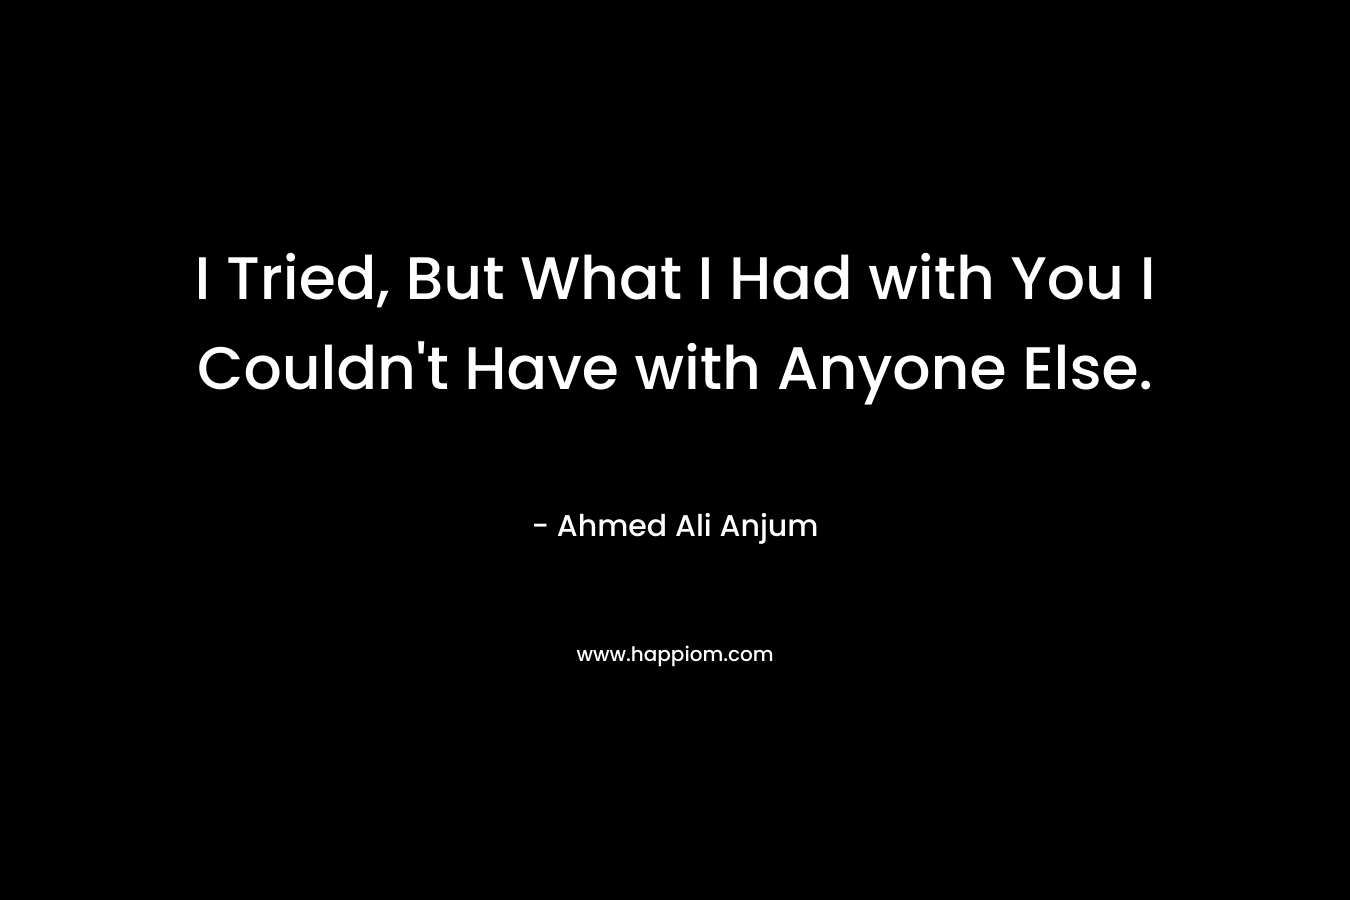 I Tried, But What I Had with You I Couldn’t Have with Anyone Else. – Ahmed Ali Anjum